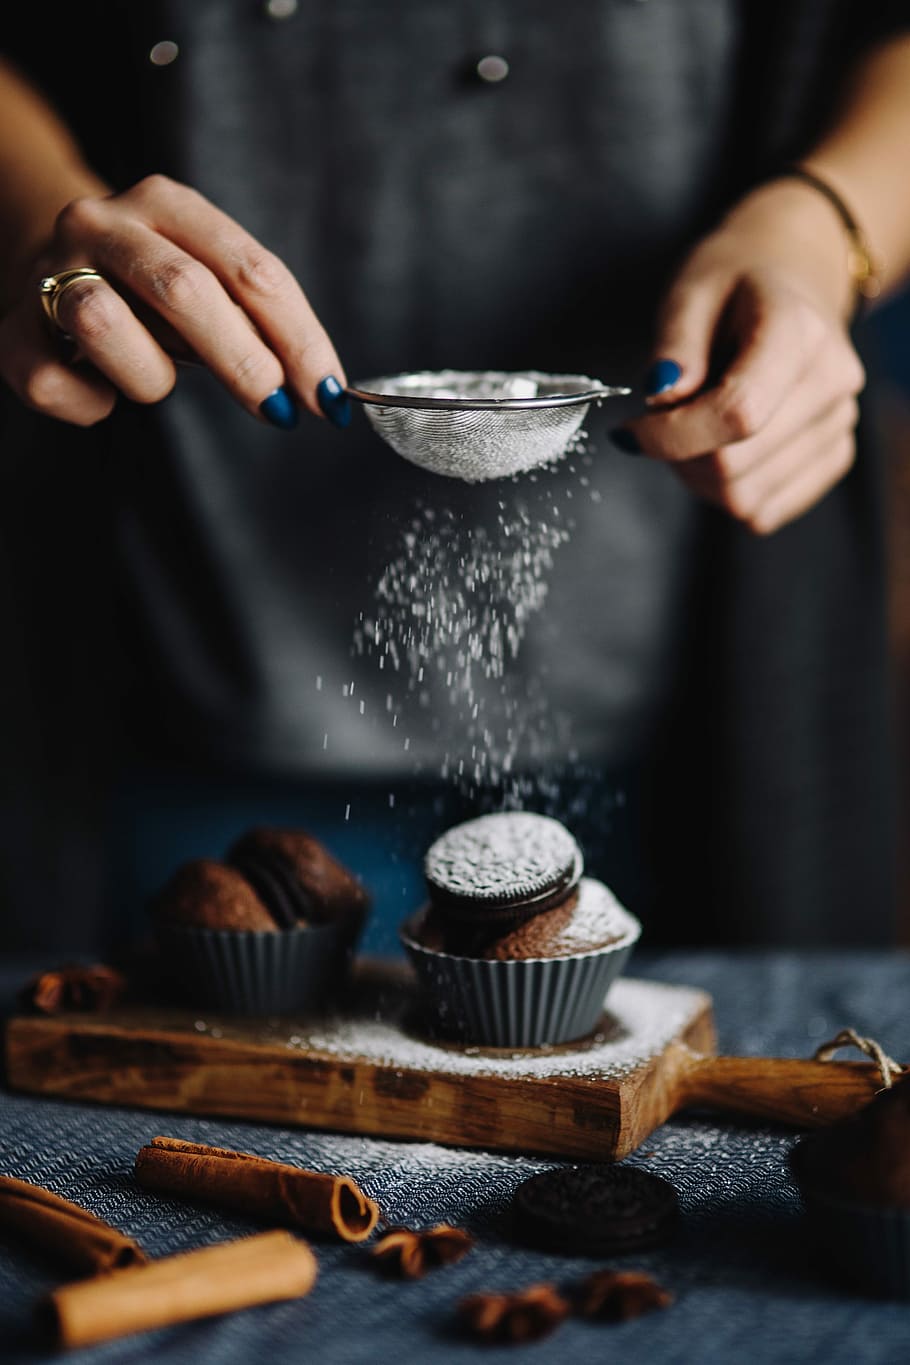 27 Baking Pictures  Download Free Images on Unsplash